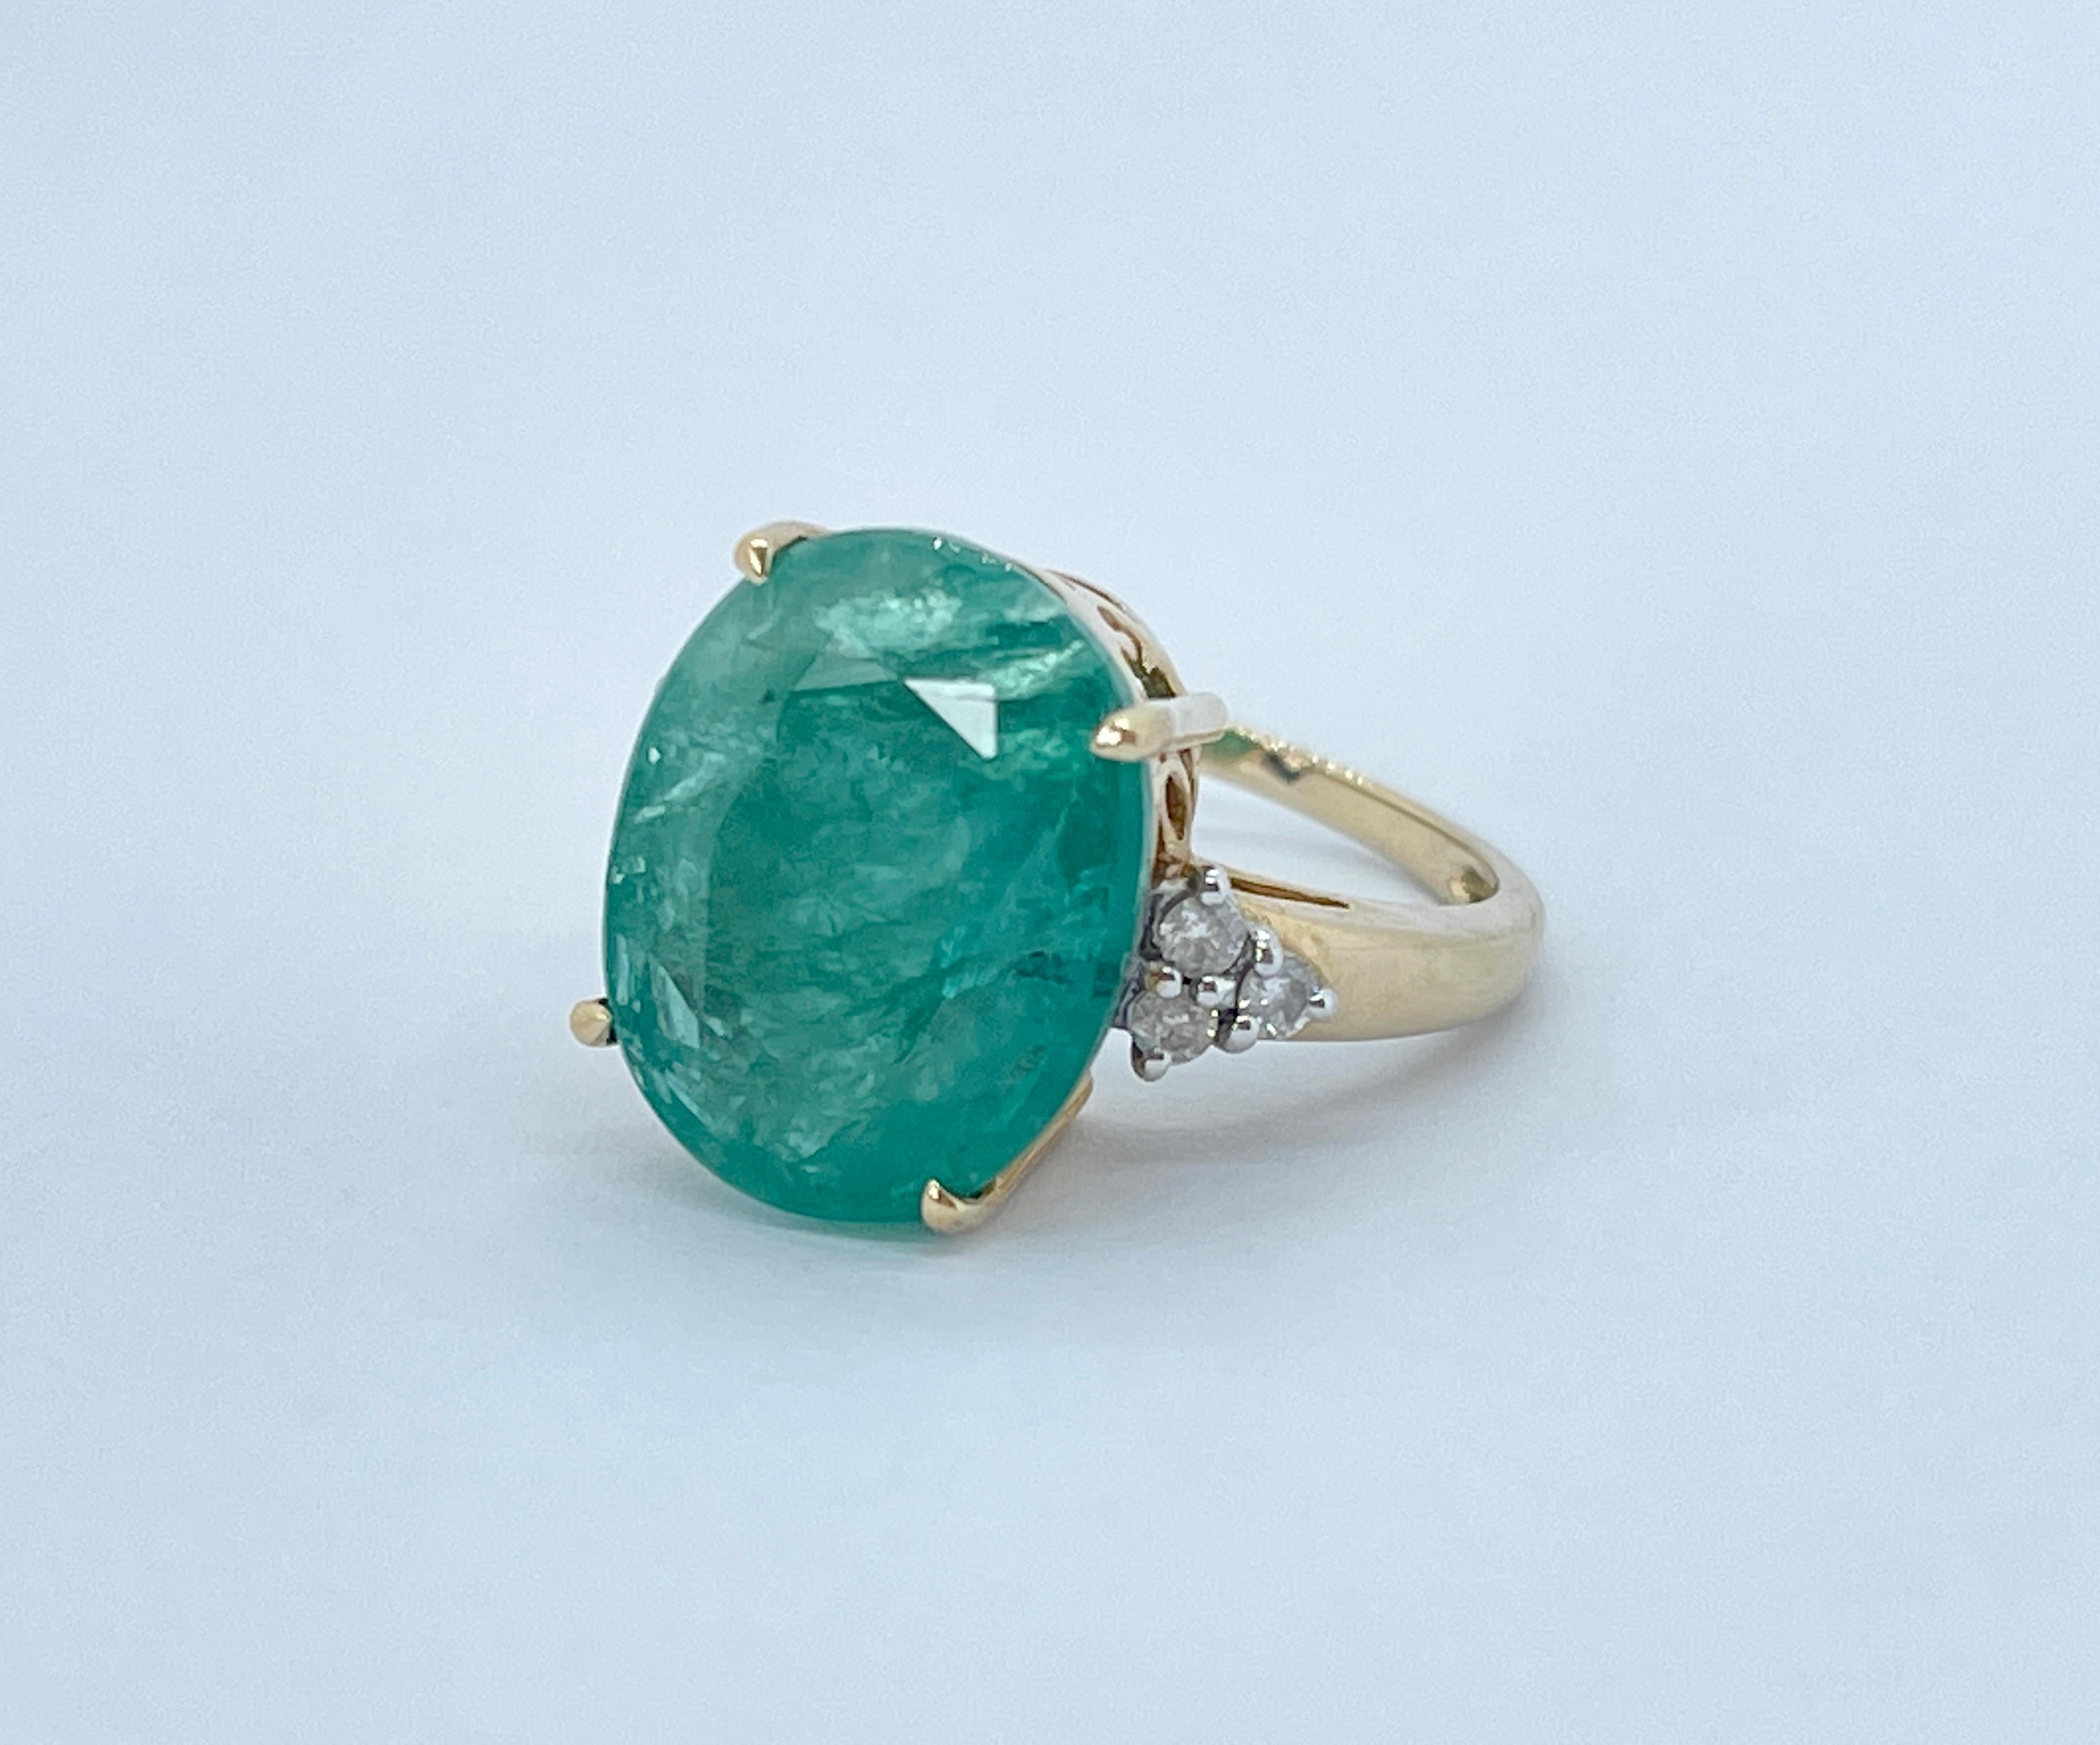 This ring features a large 6.06ct Oval Emerald with 3 x little diamonds on each shoulder.
The Emerald is medium green and is an impressive size. It has some inclusions throughout the stone which is typical to the Emerald gemstone.  There is a